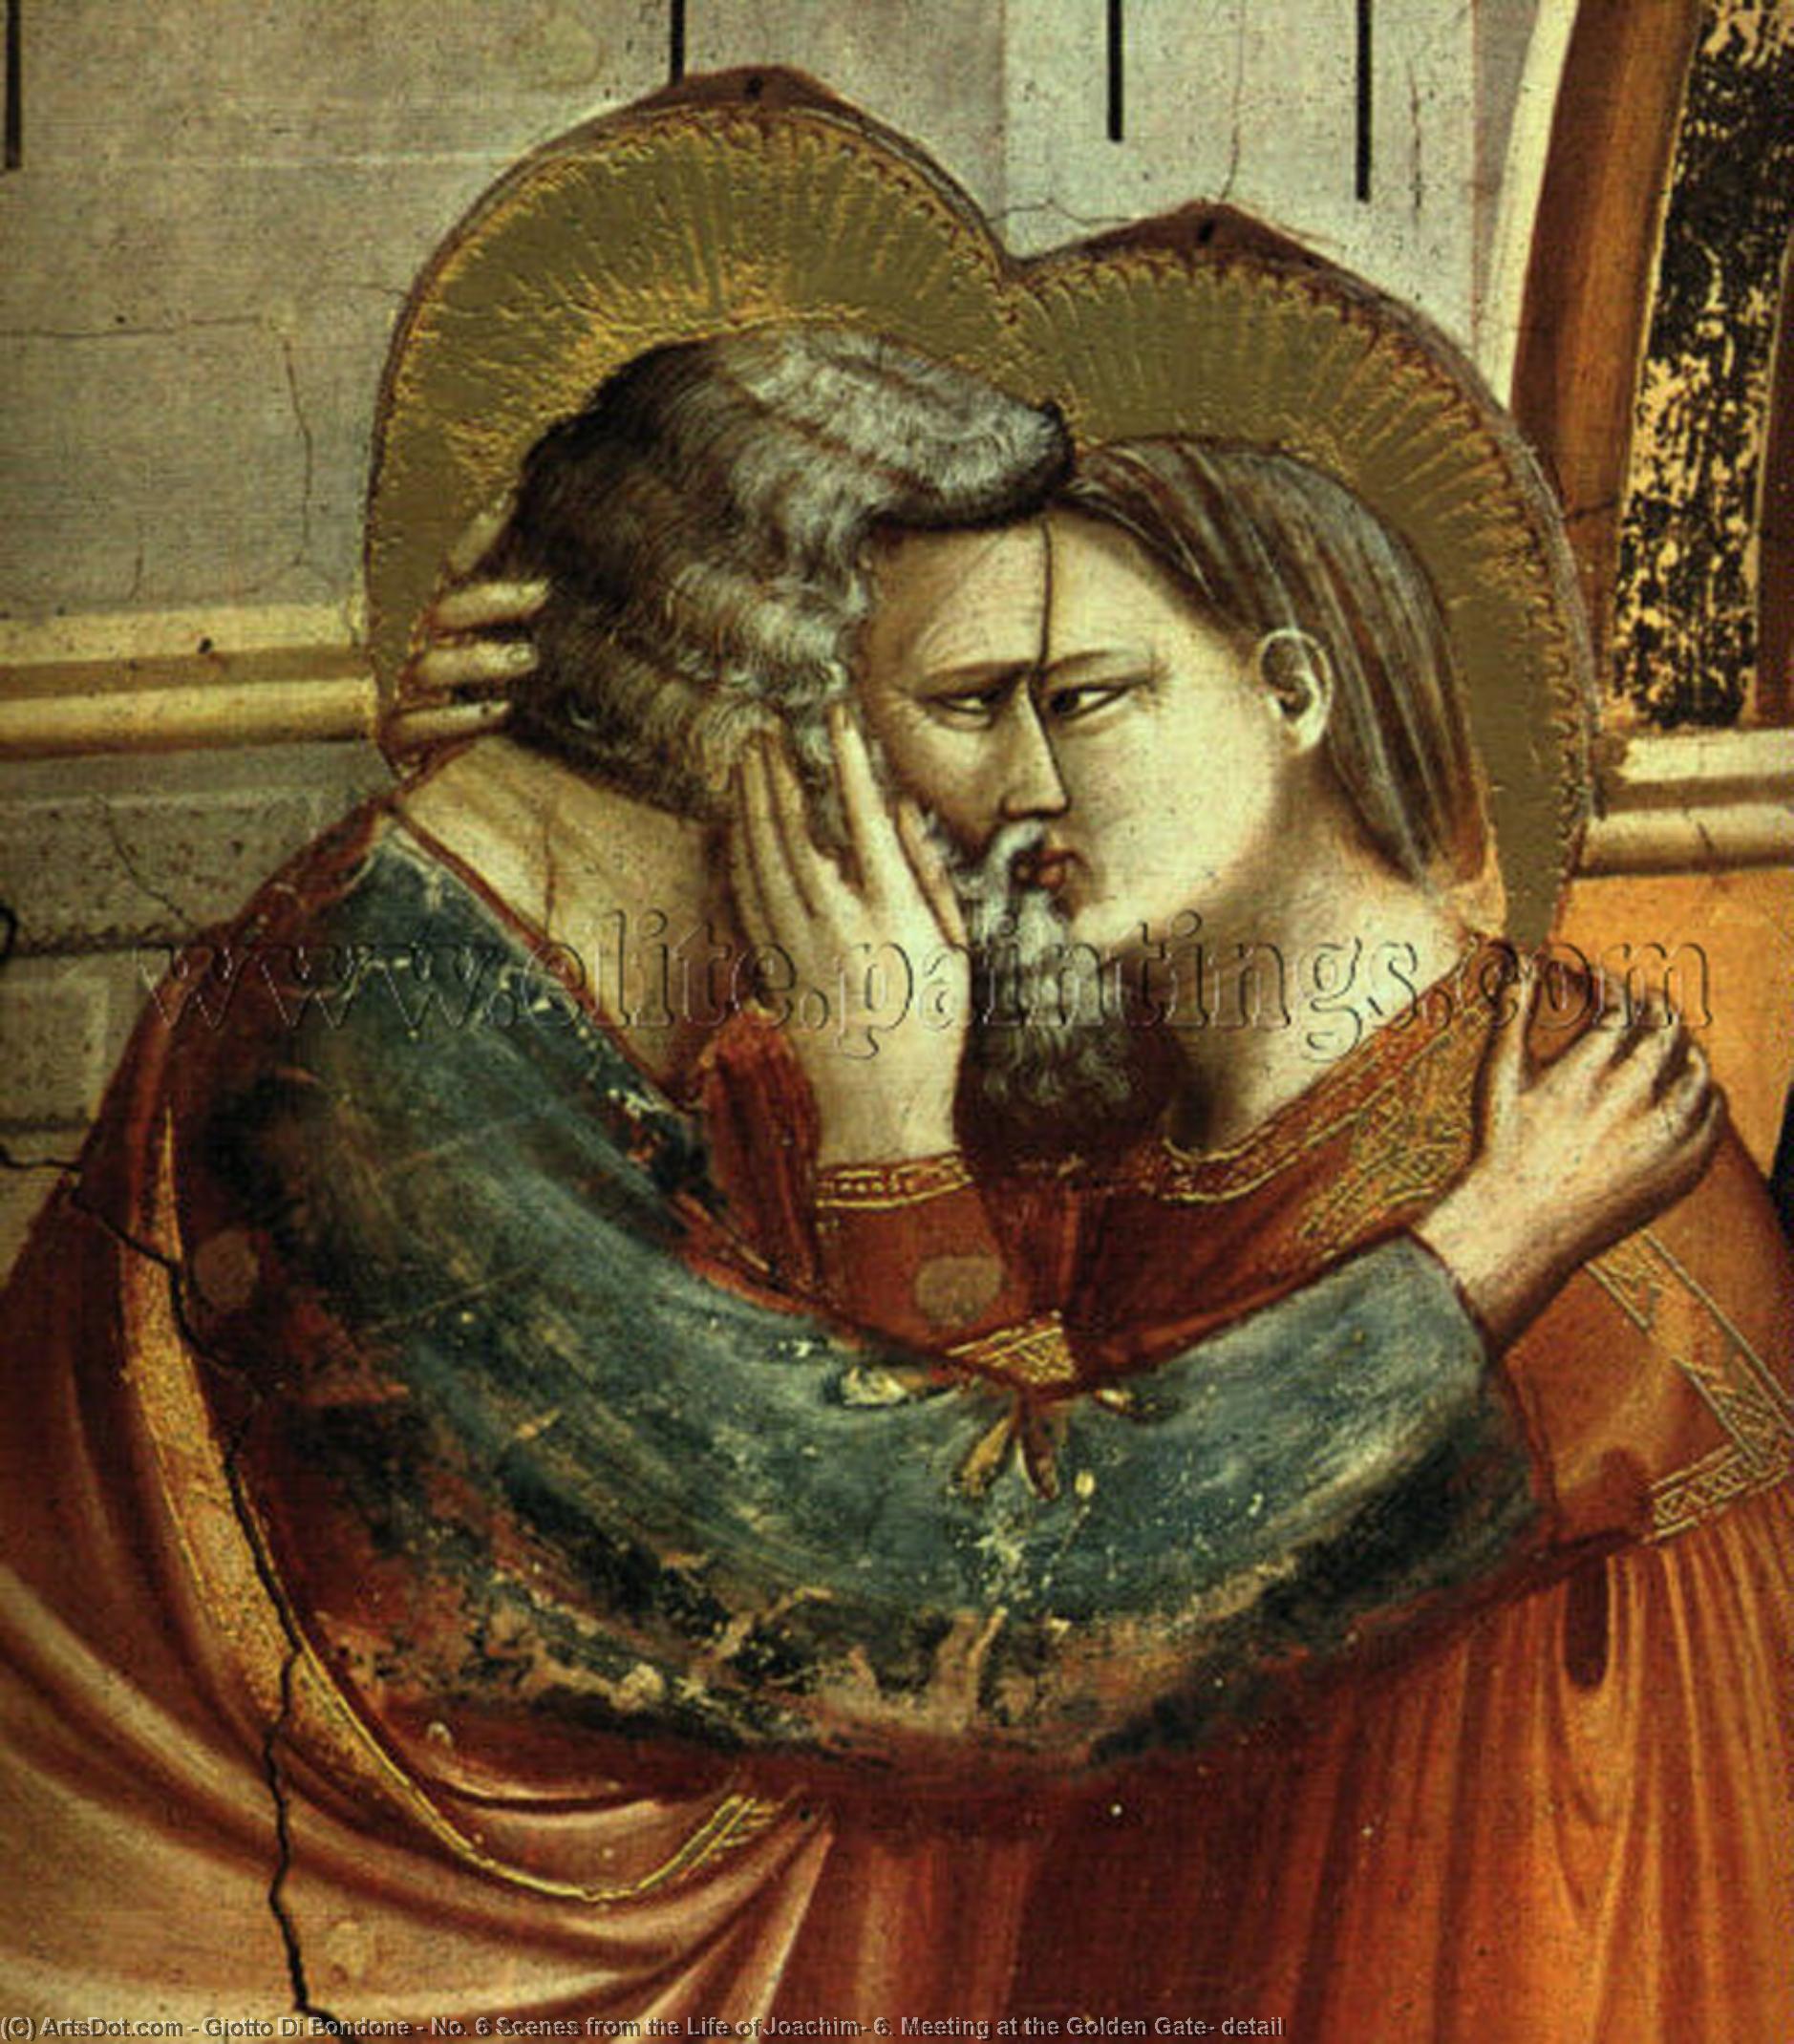 WikiOO.org - Encyclopedia of Fine Arts - Schilderen, Artwork Giotto Di Bondone - No. 6 Scenes from the Life of Joachim: 6. Meeting at the Golden Gate, detail